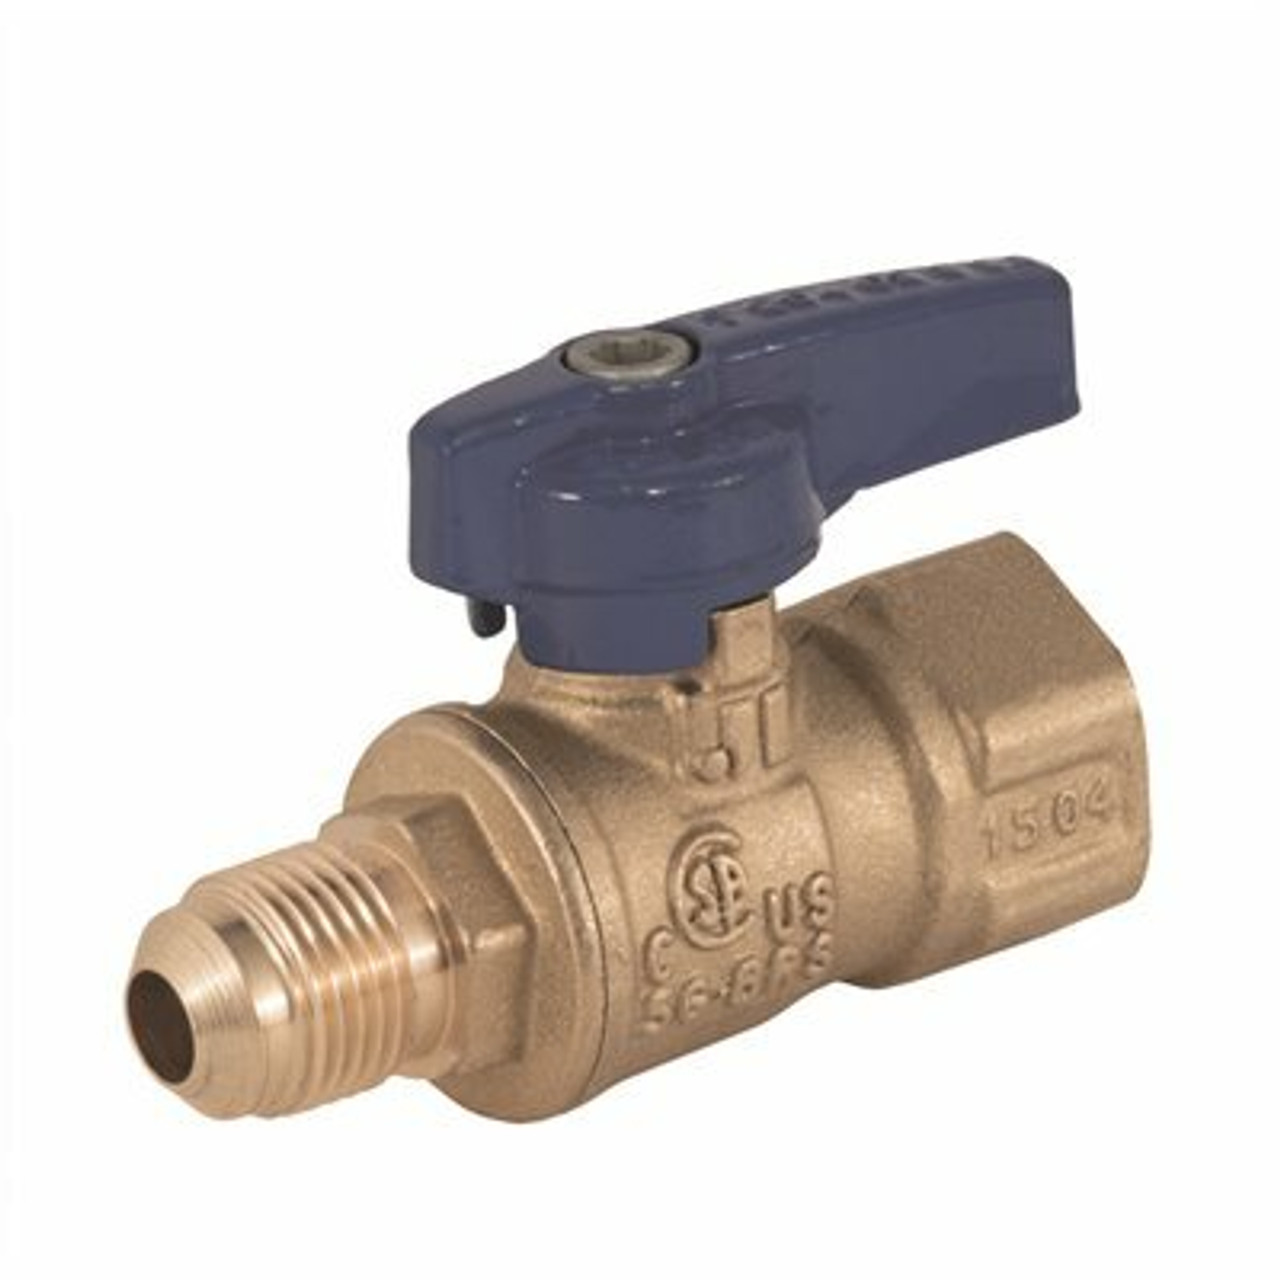 Jomar 1/2 In. Flare X 1/2 In. Fnpt Gas Ball Valve With Dielectric Union